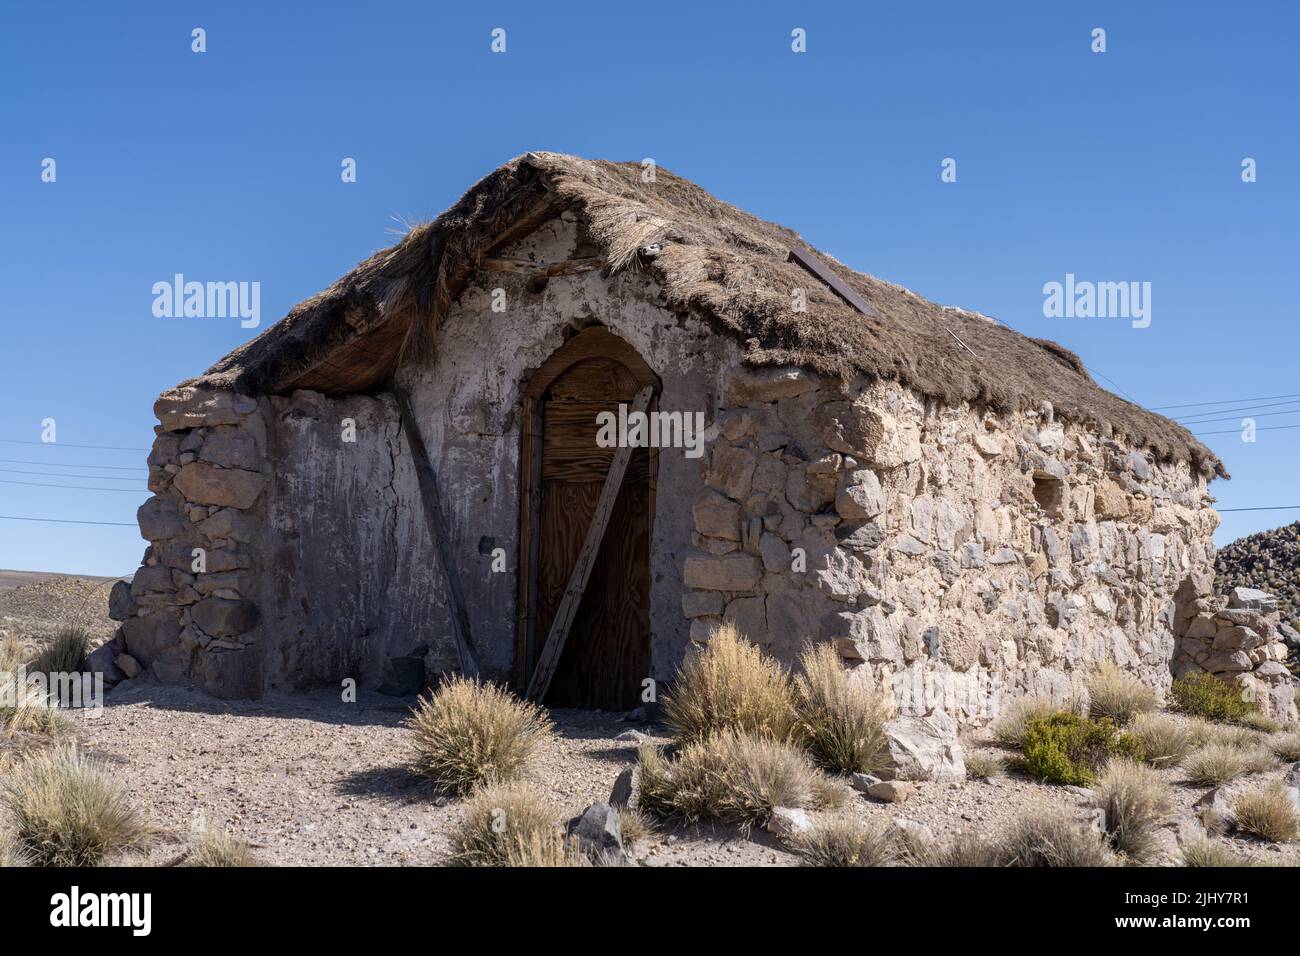 An abandoned stone cottage with a thatched roof in Lauca National Park on the high Andean altiplano in Chile. Stock Photo